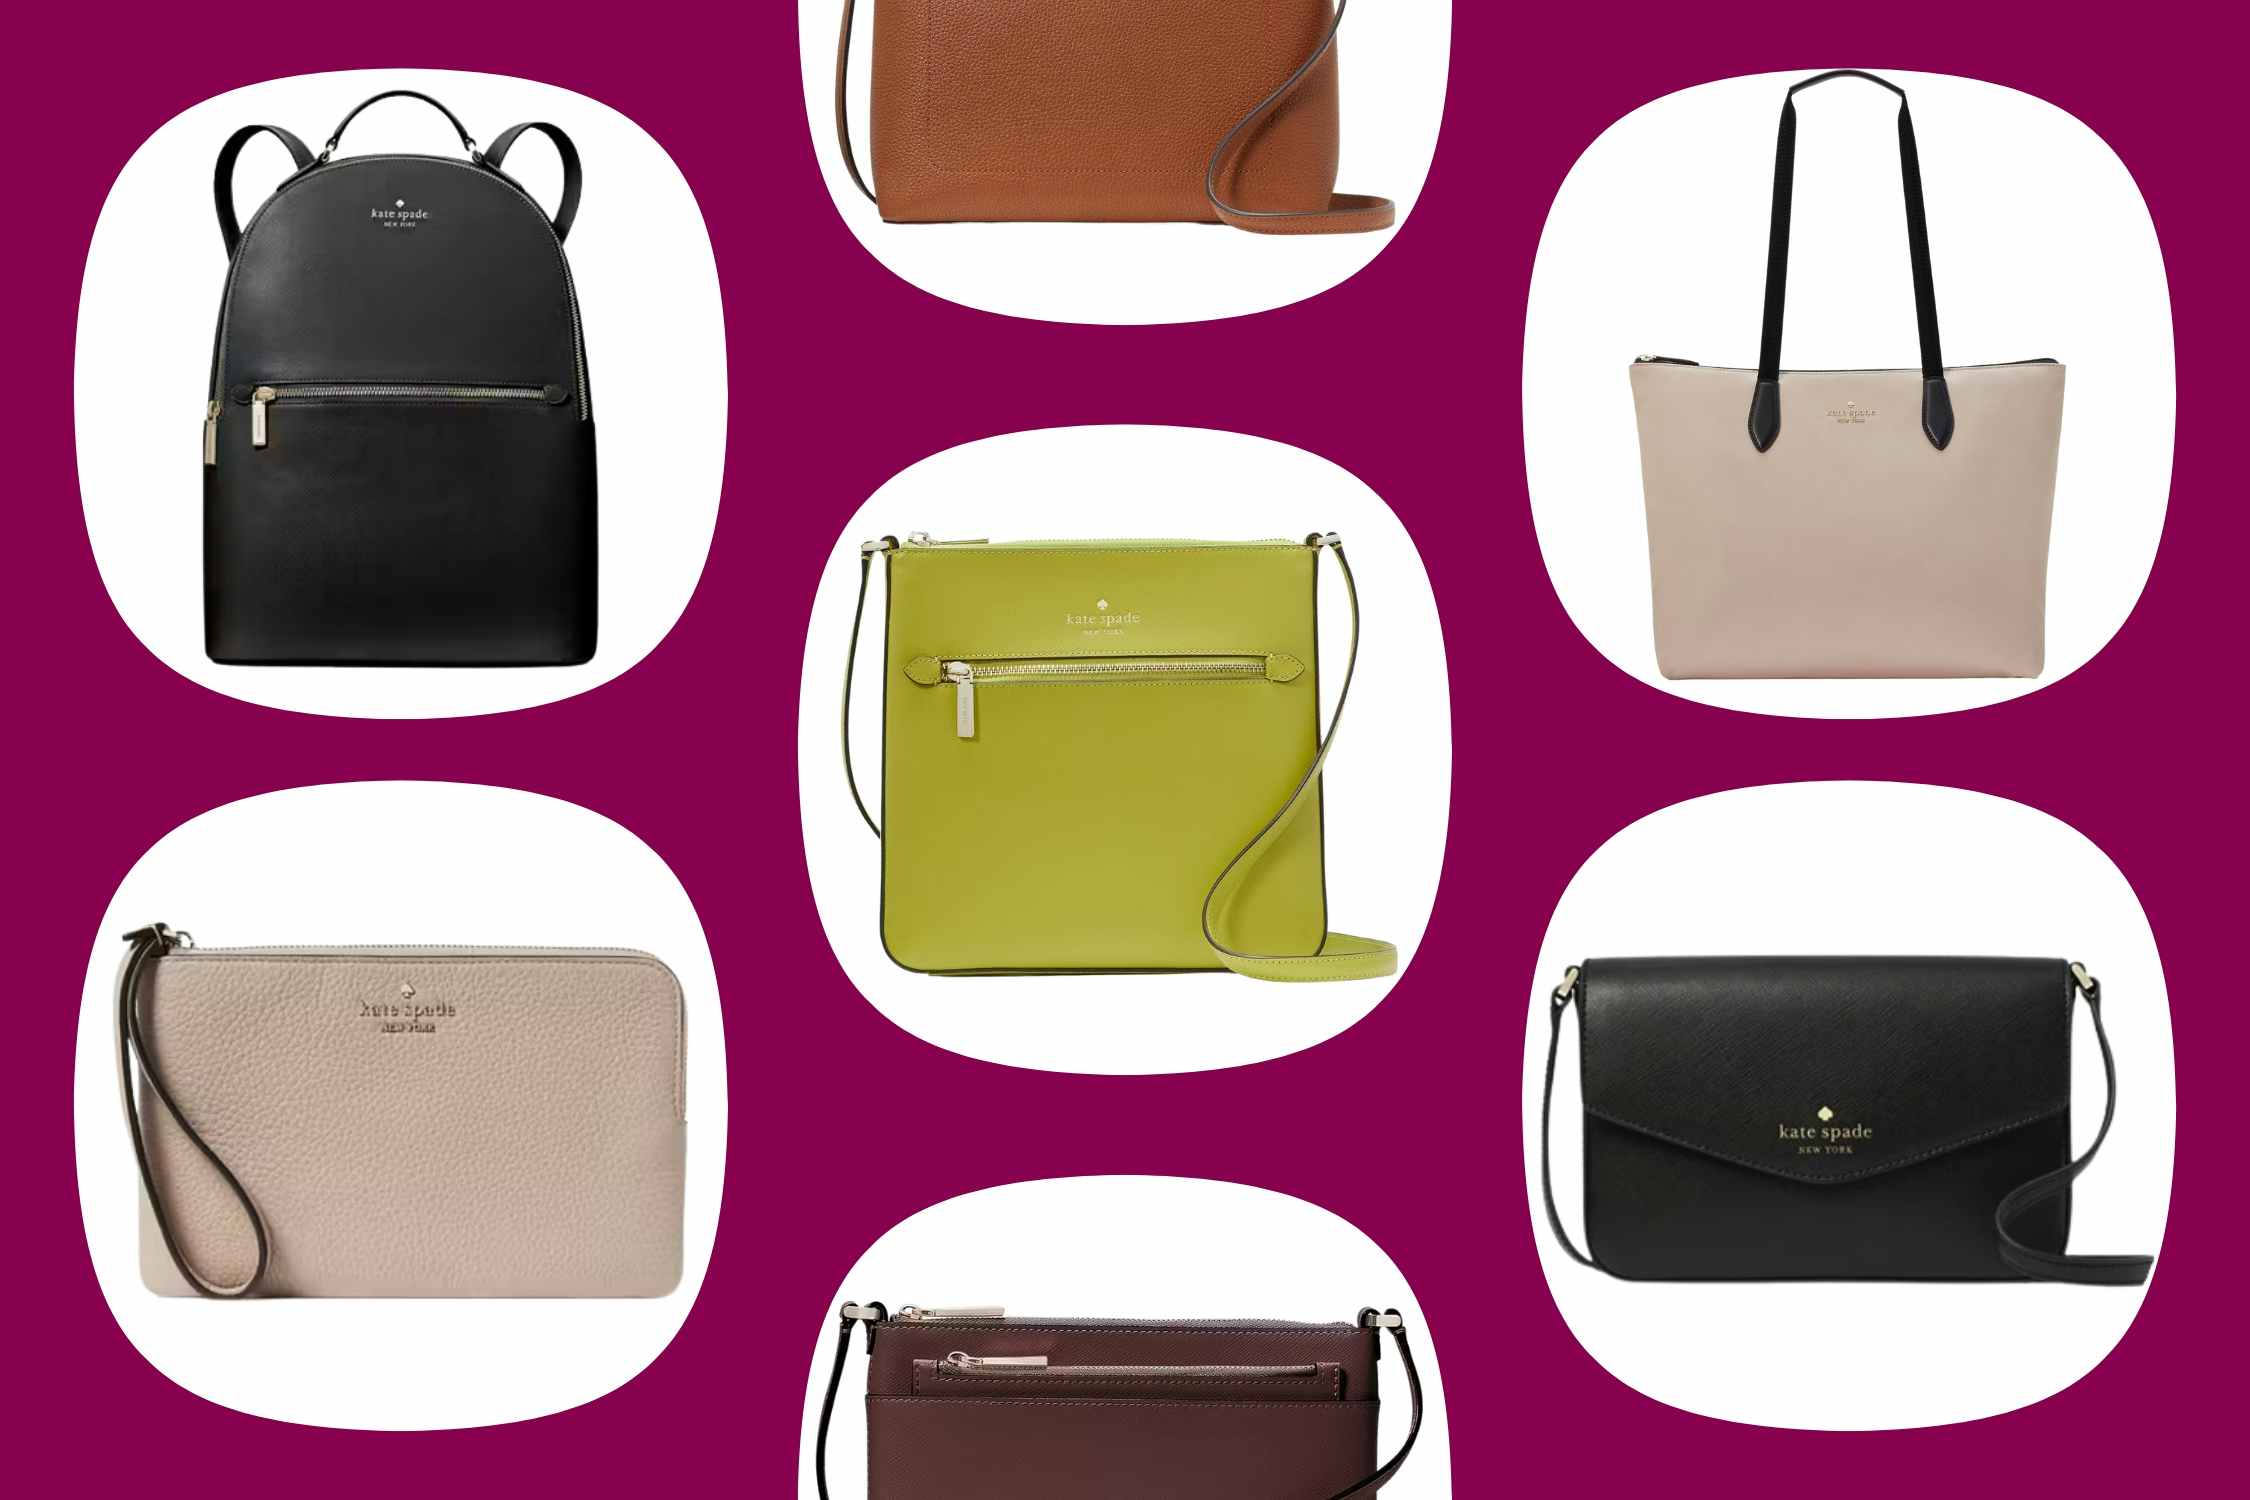 70% Off Kate Spade Outlet: $39 Wallets, $62 Purses, $89 Totes, and More